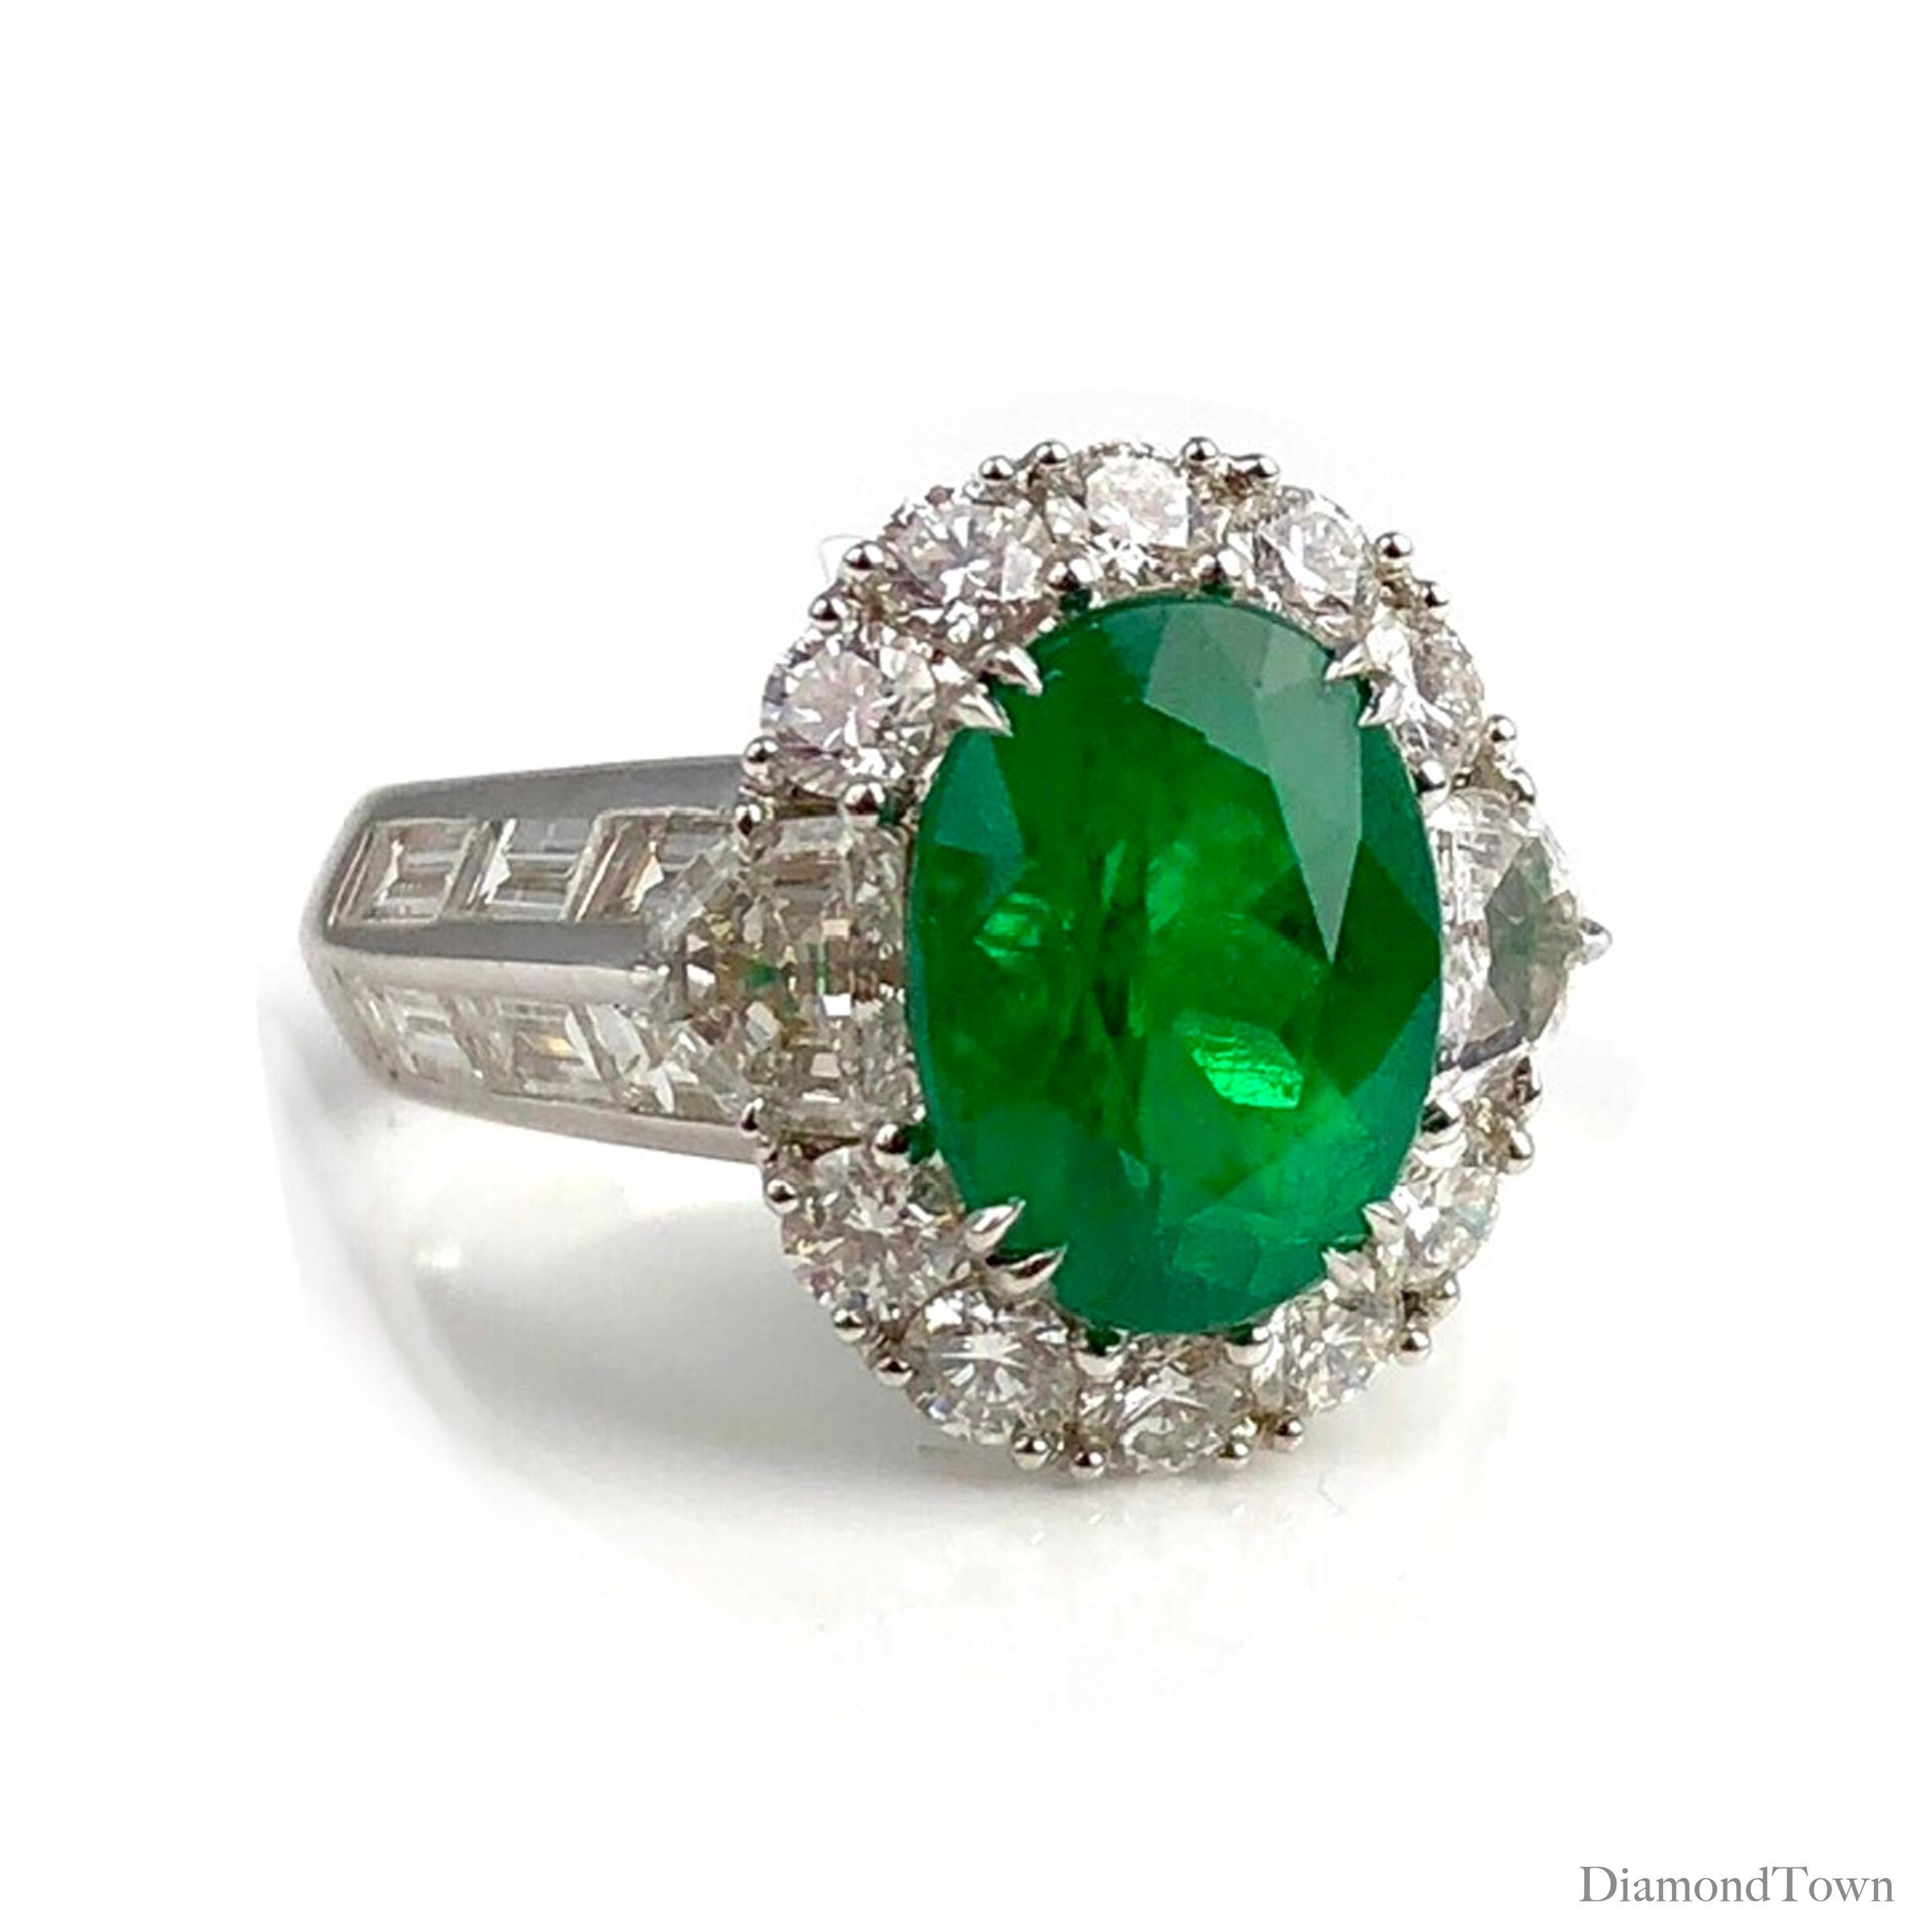 (DiamondTown) This ring sparkles with a 3.00 carat Colombian Emerald center, surrounded by a halo of white diamonds and additional diamonds extending down the side shank. (Total diamond weight 2.50 carats.)

Set in 18k White Gold.

Many of our items